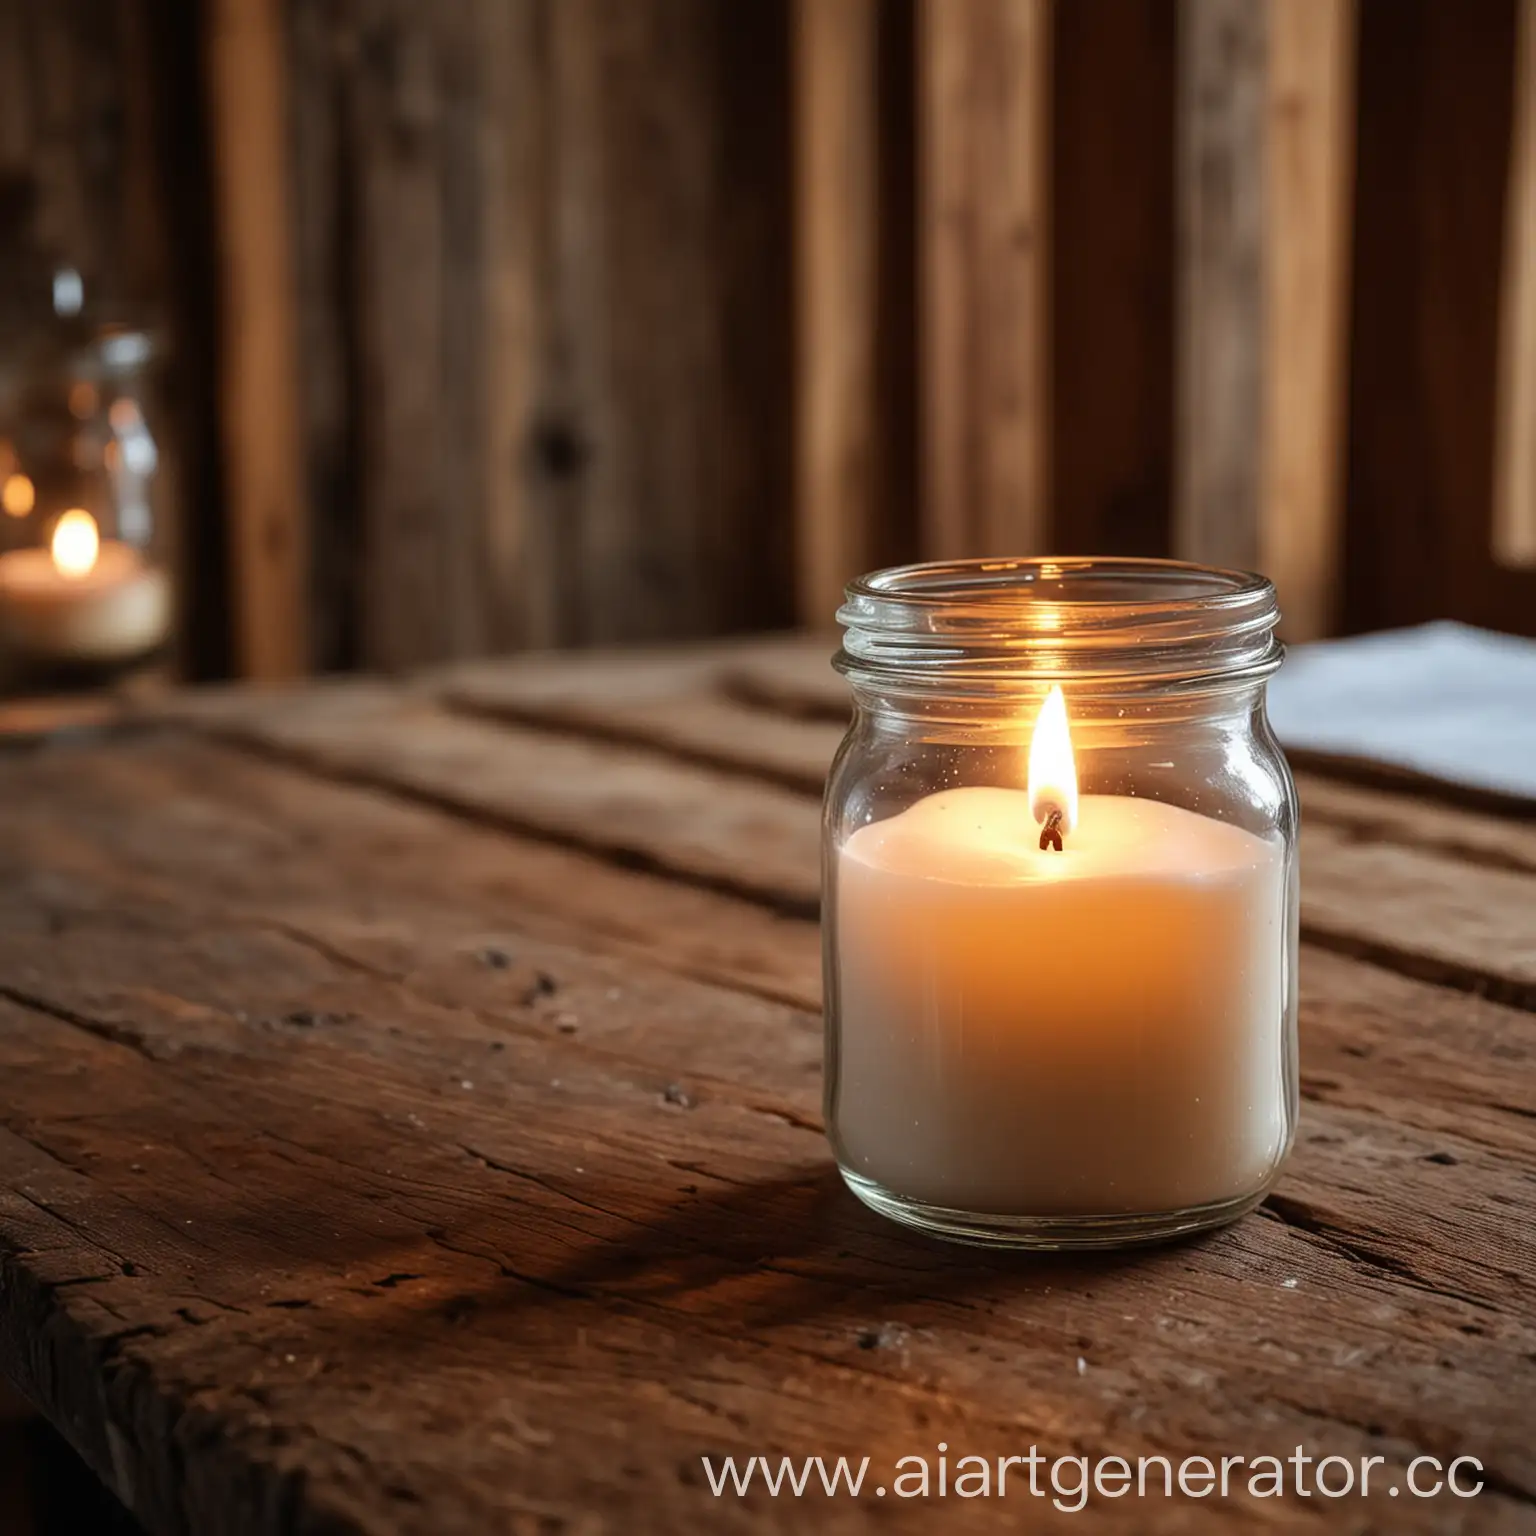 Rustic-Wooden-House-Interior-Candlelit-Ambiance-on-a-Wooden-Table